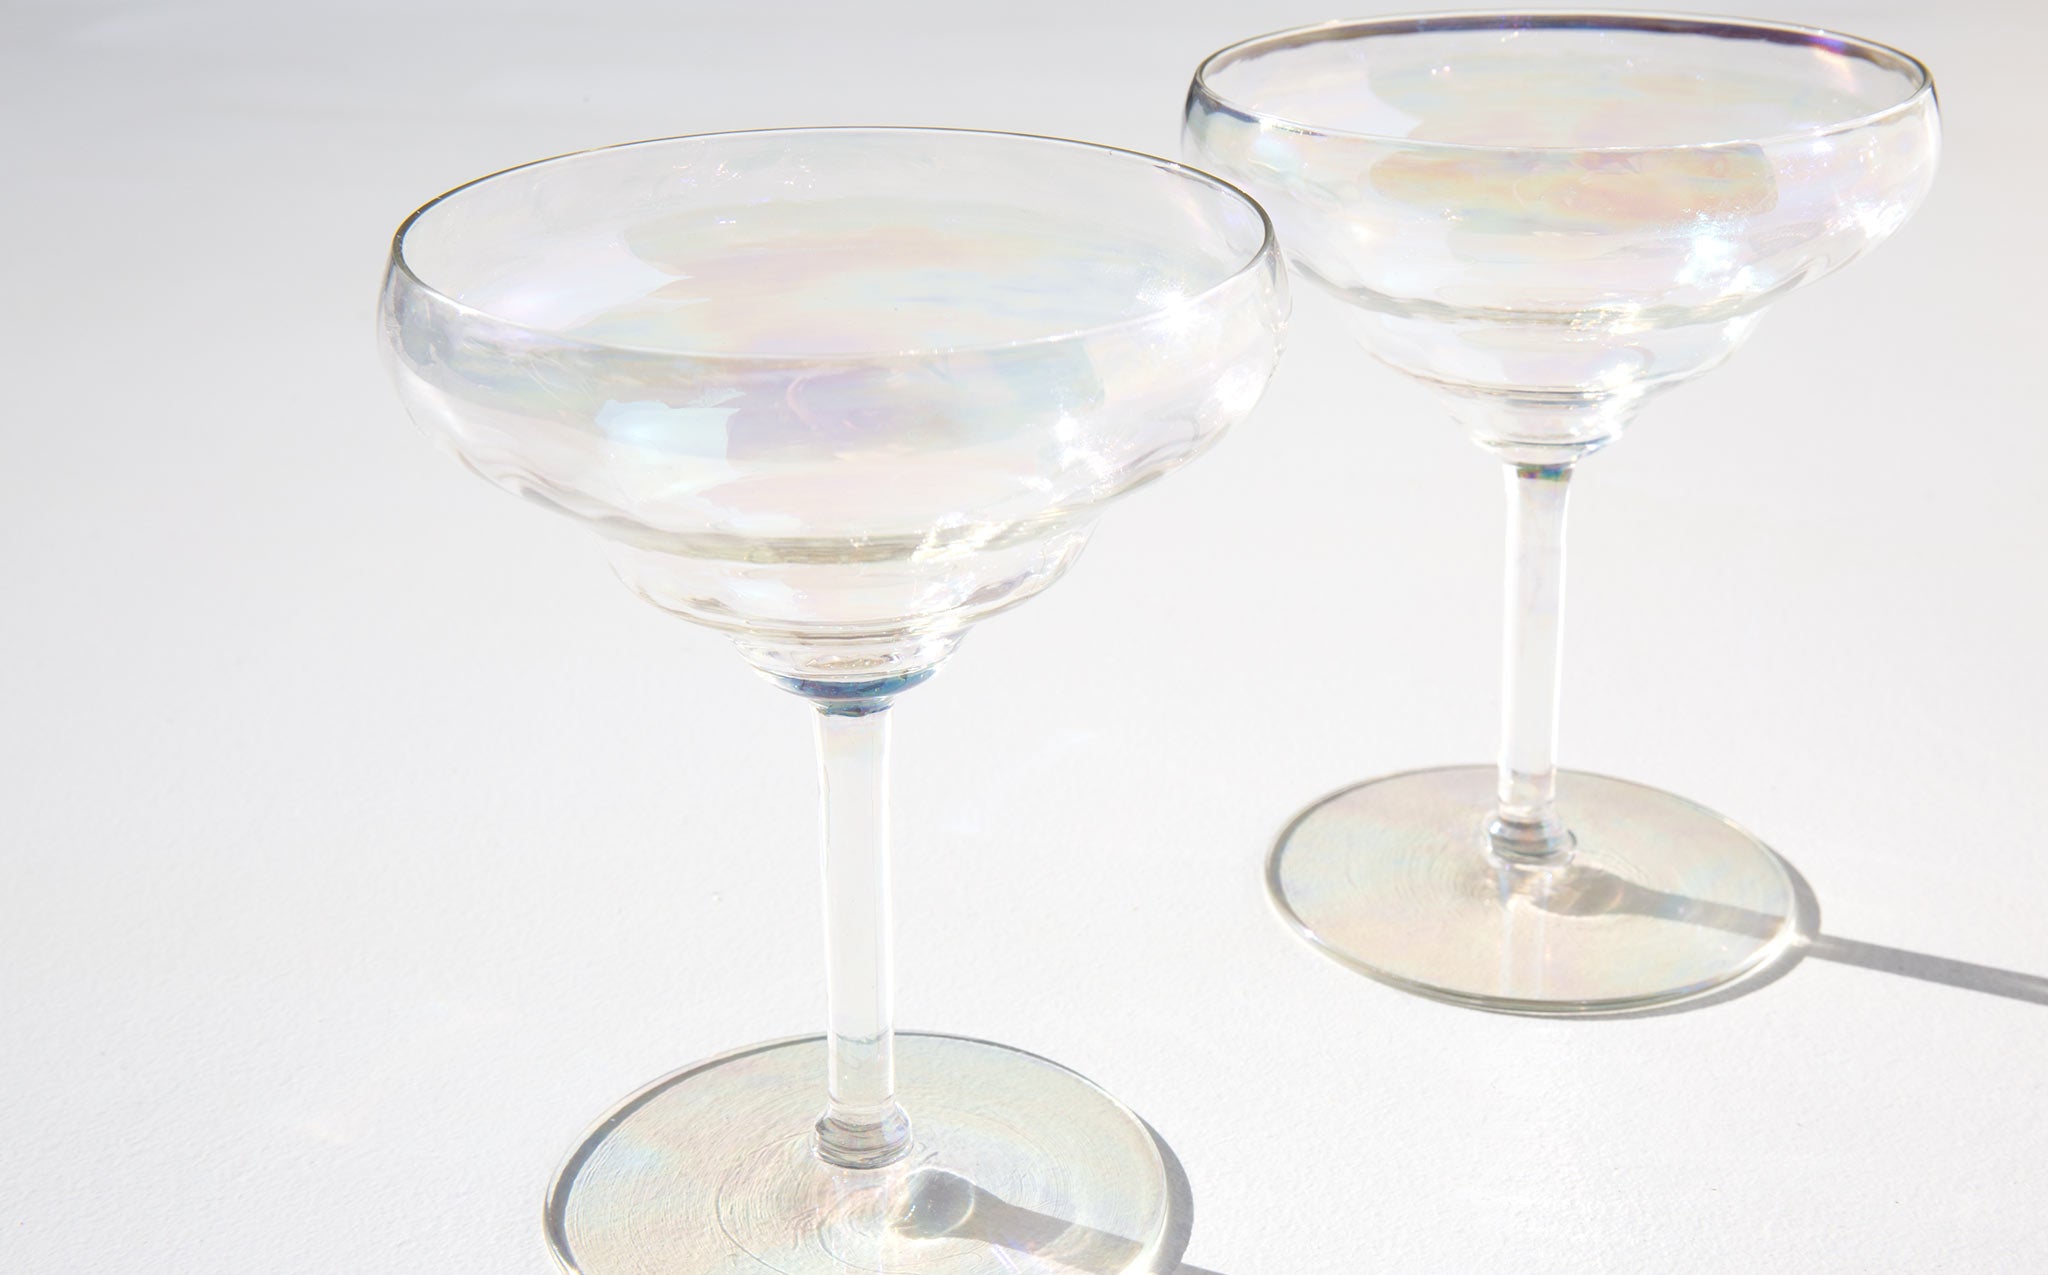 Waved Iridescent Champagne Coupes